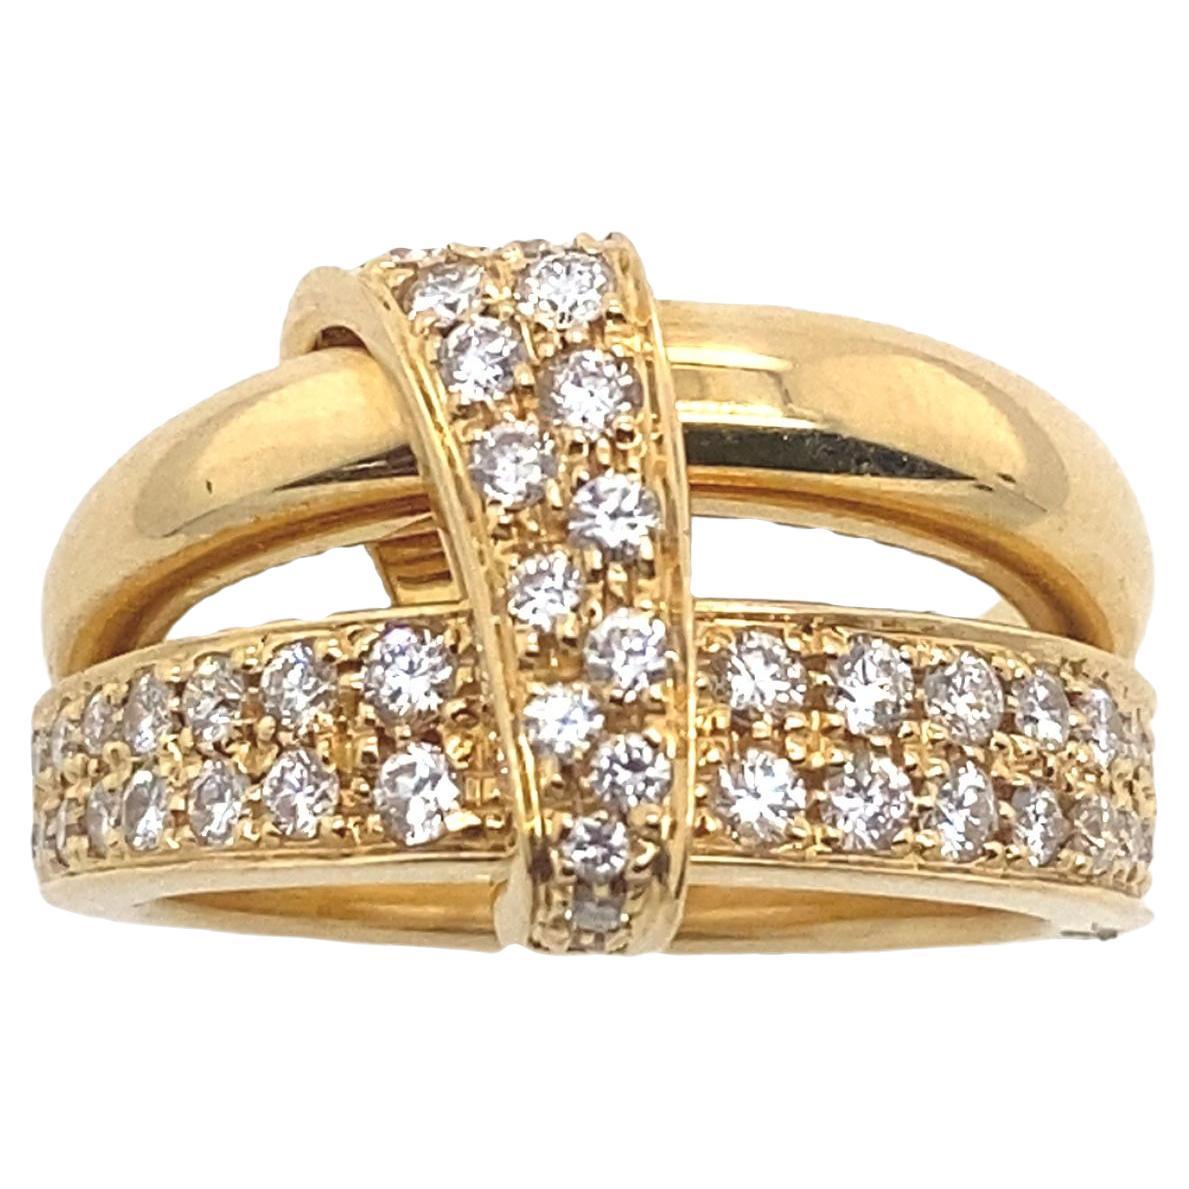 Asprey Dimond 2-Band Ring, Set With 0.65ct Diamonds In 18ct Yellow Gold